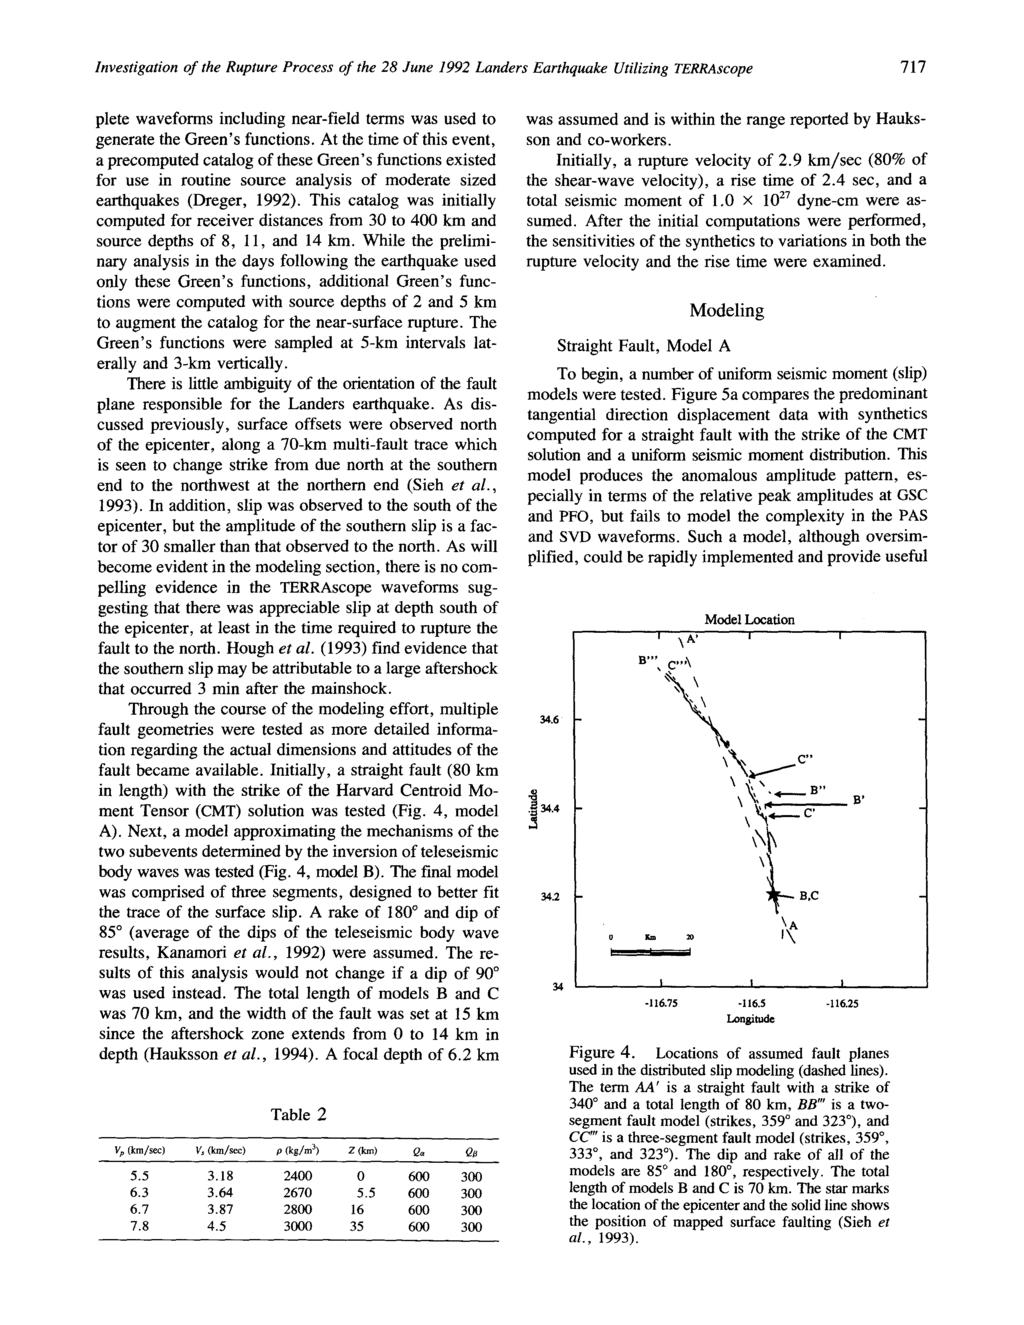 nvestigation of the Rupture Process of the 28 June 1992 Landers Earthquake Utilizing TERRAscope 717 plete waveforms including near-field terms was used to generate the Green's functions.